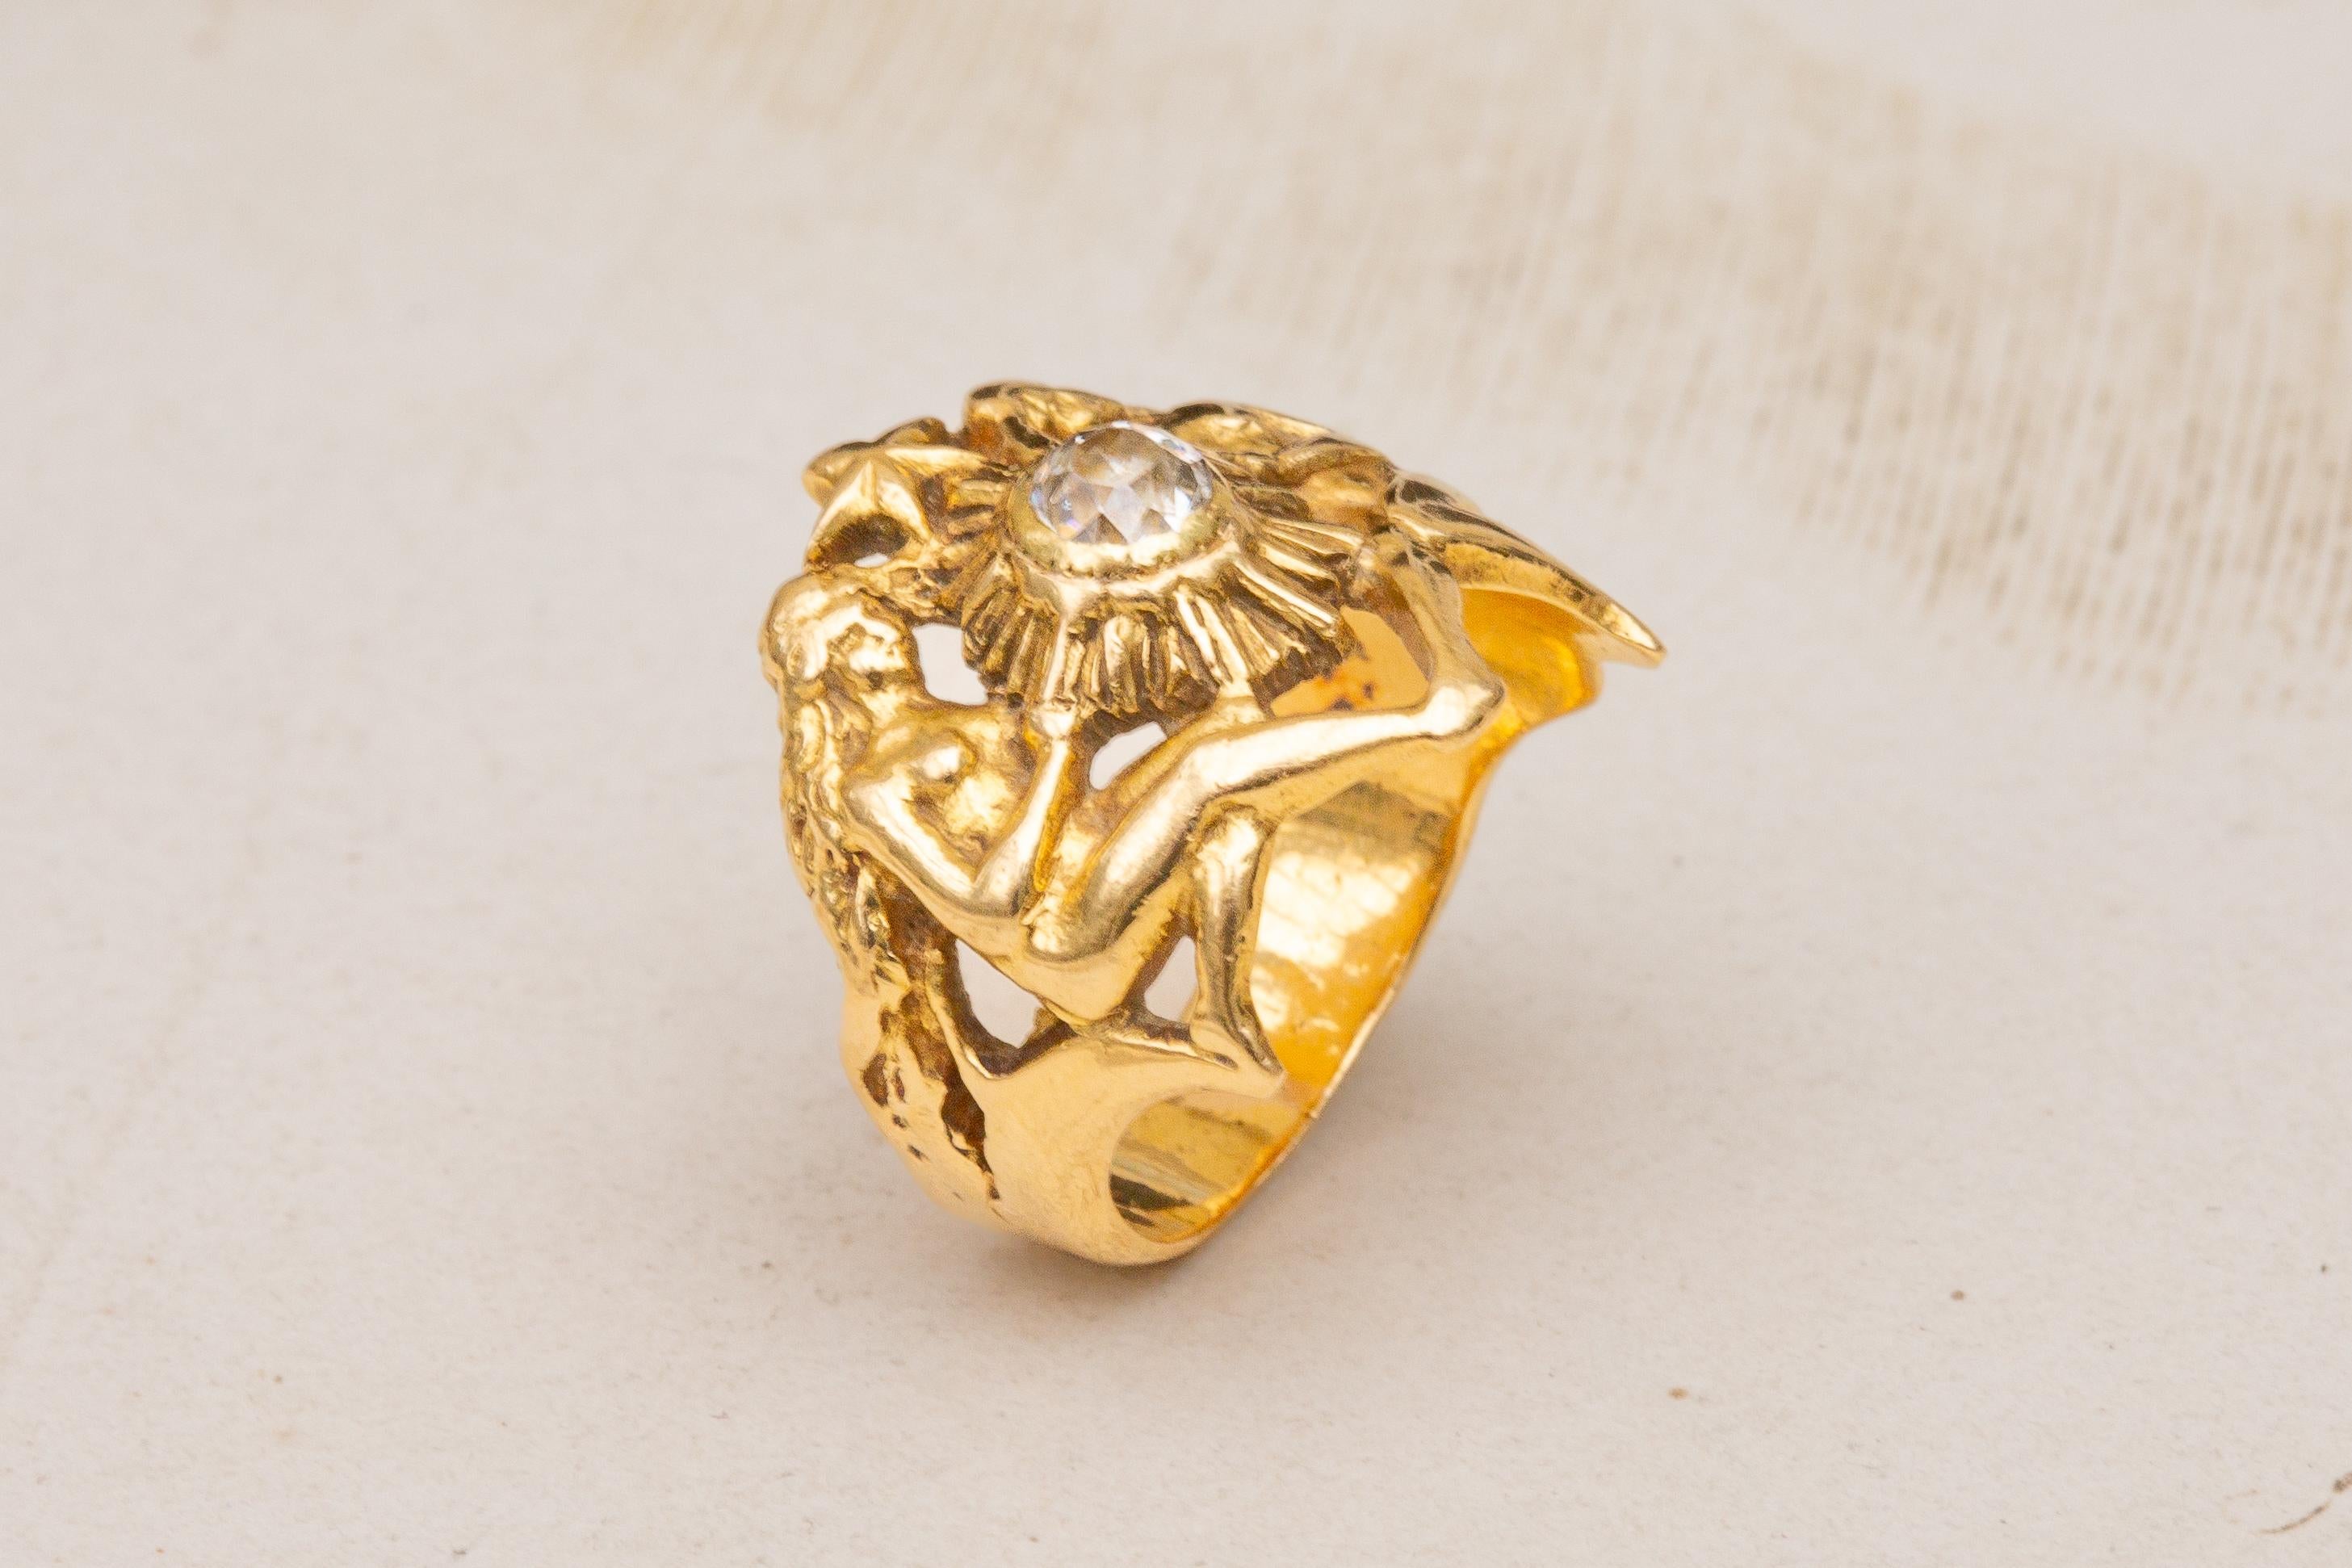 French Antique Heavy 18K Gold Ethereal Figural 0.35ct Old European Cut Diamond 1